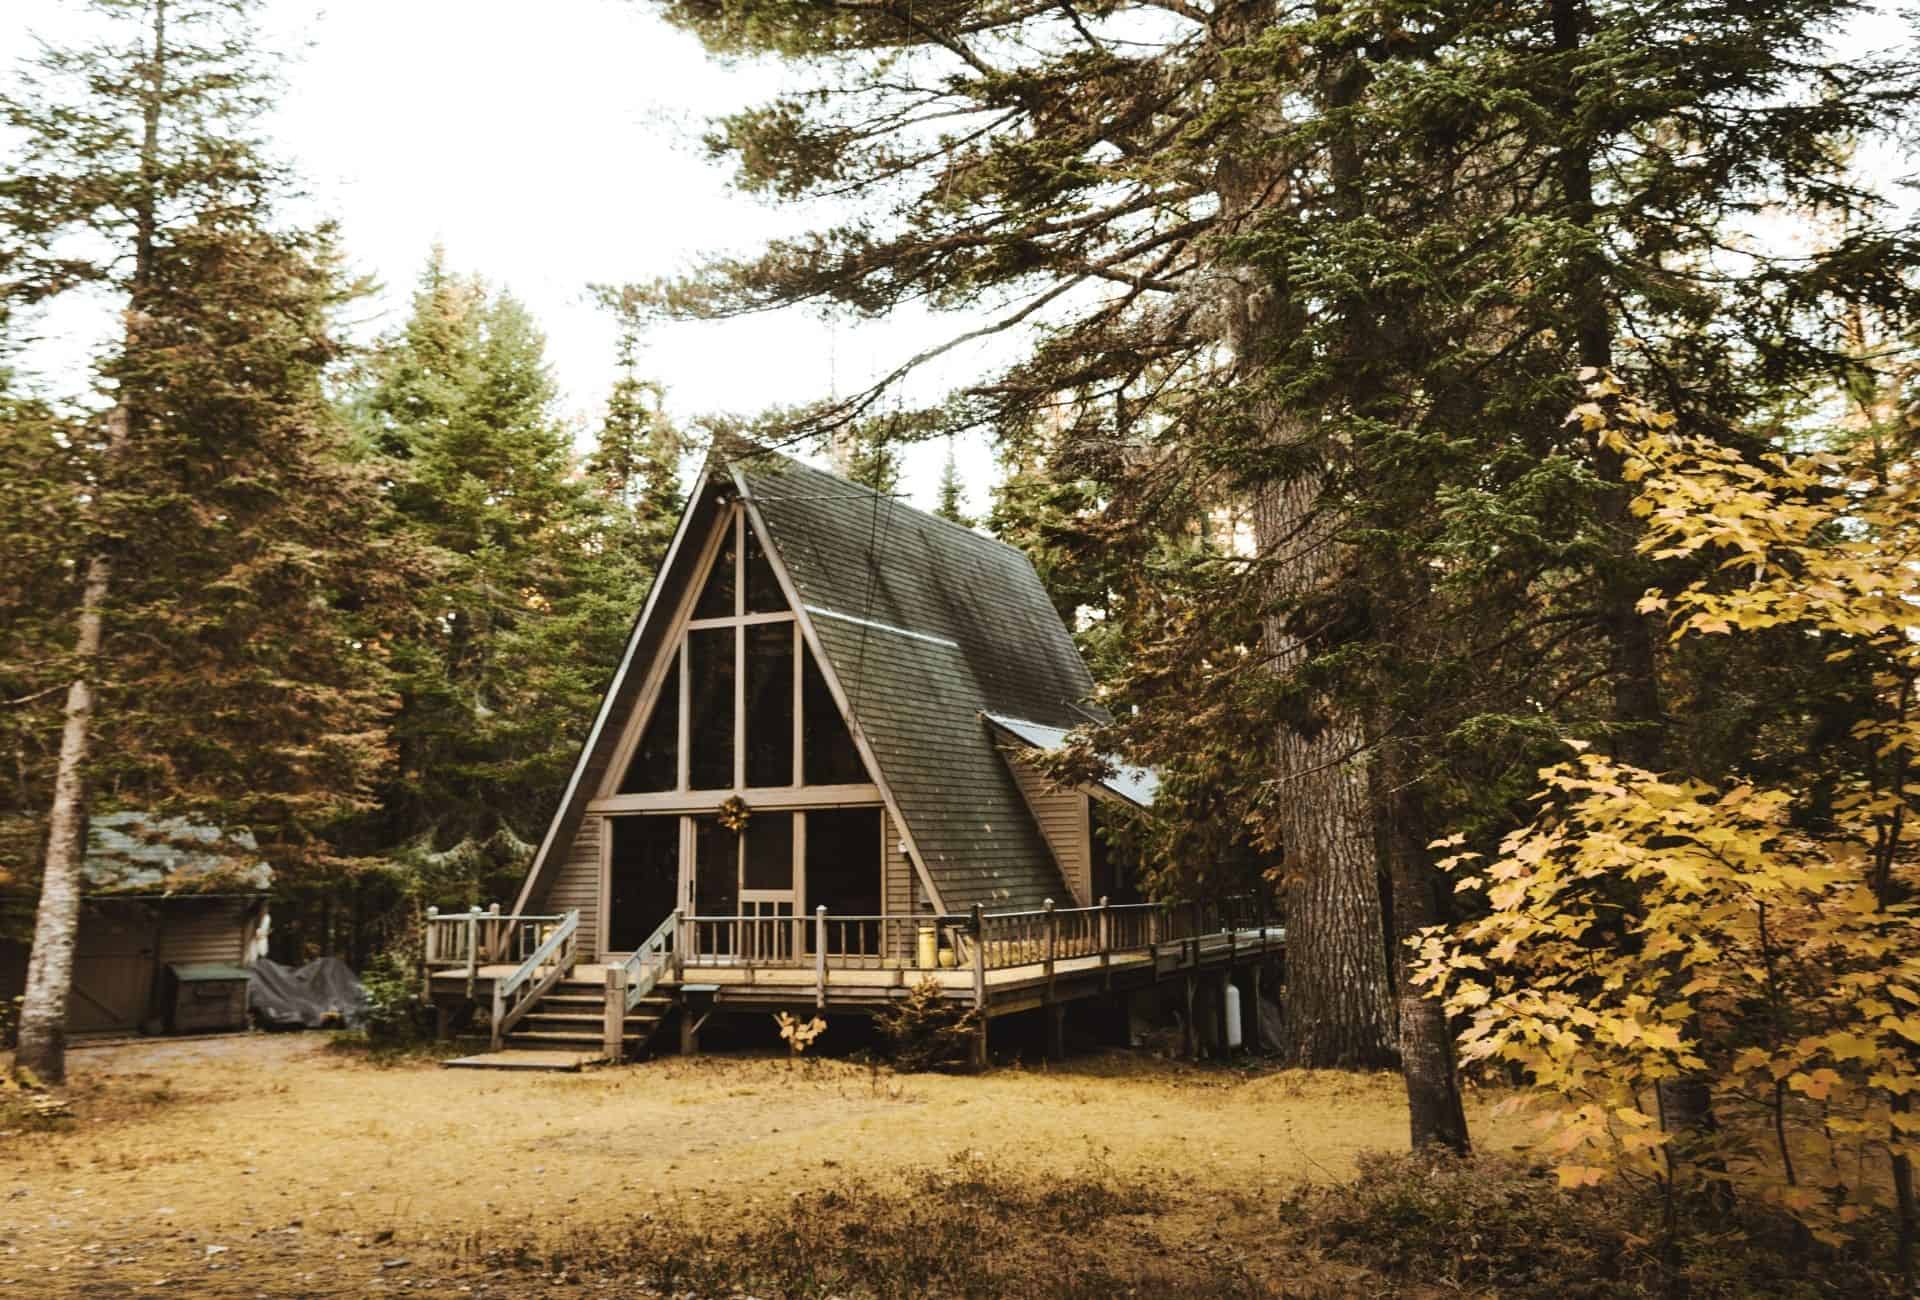 A-frame cabin in the woods.